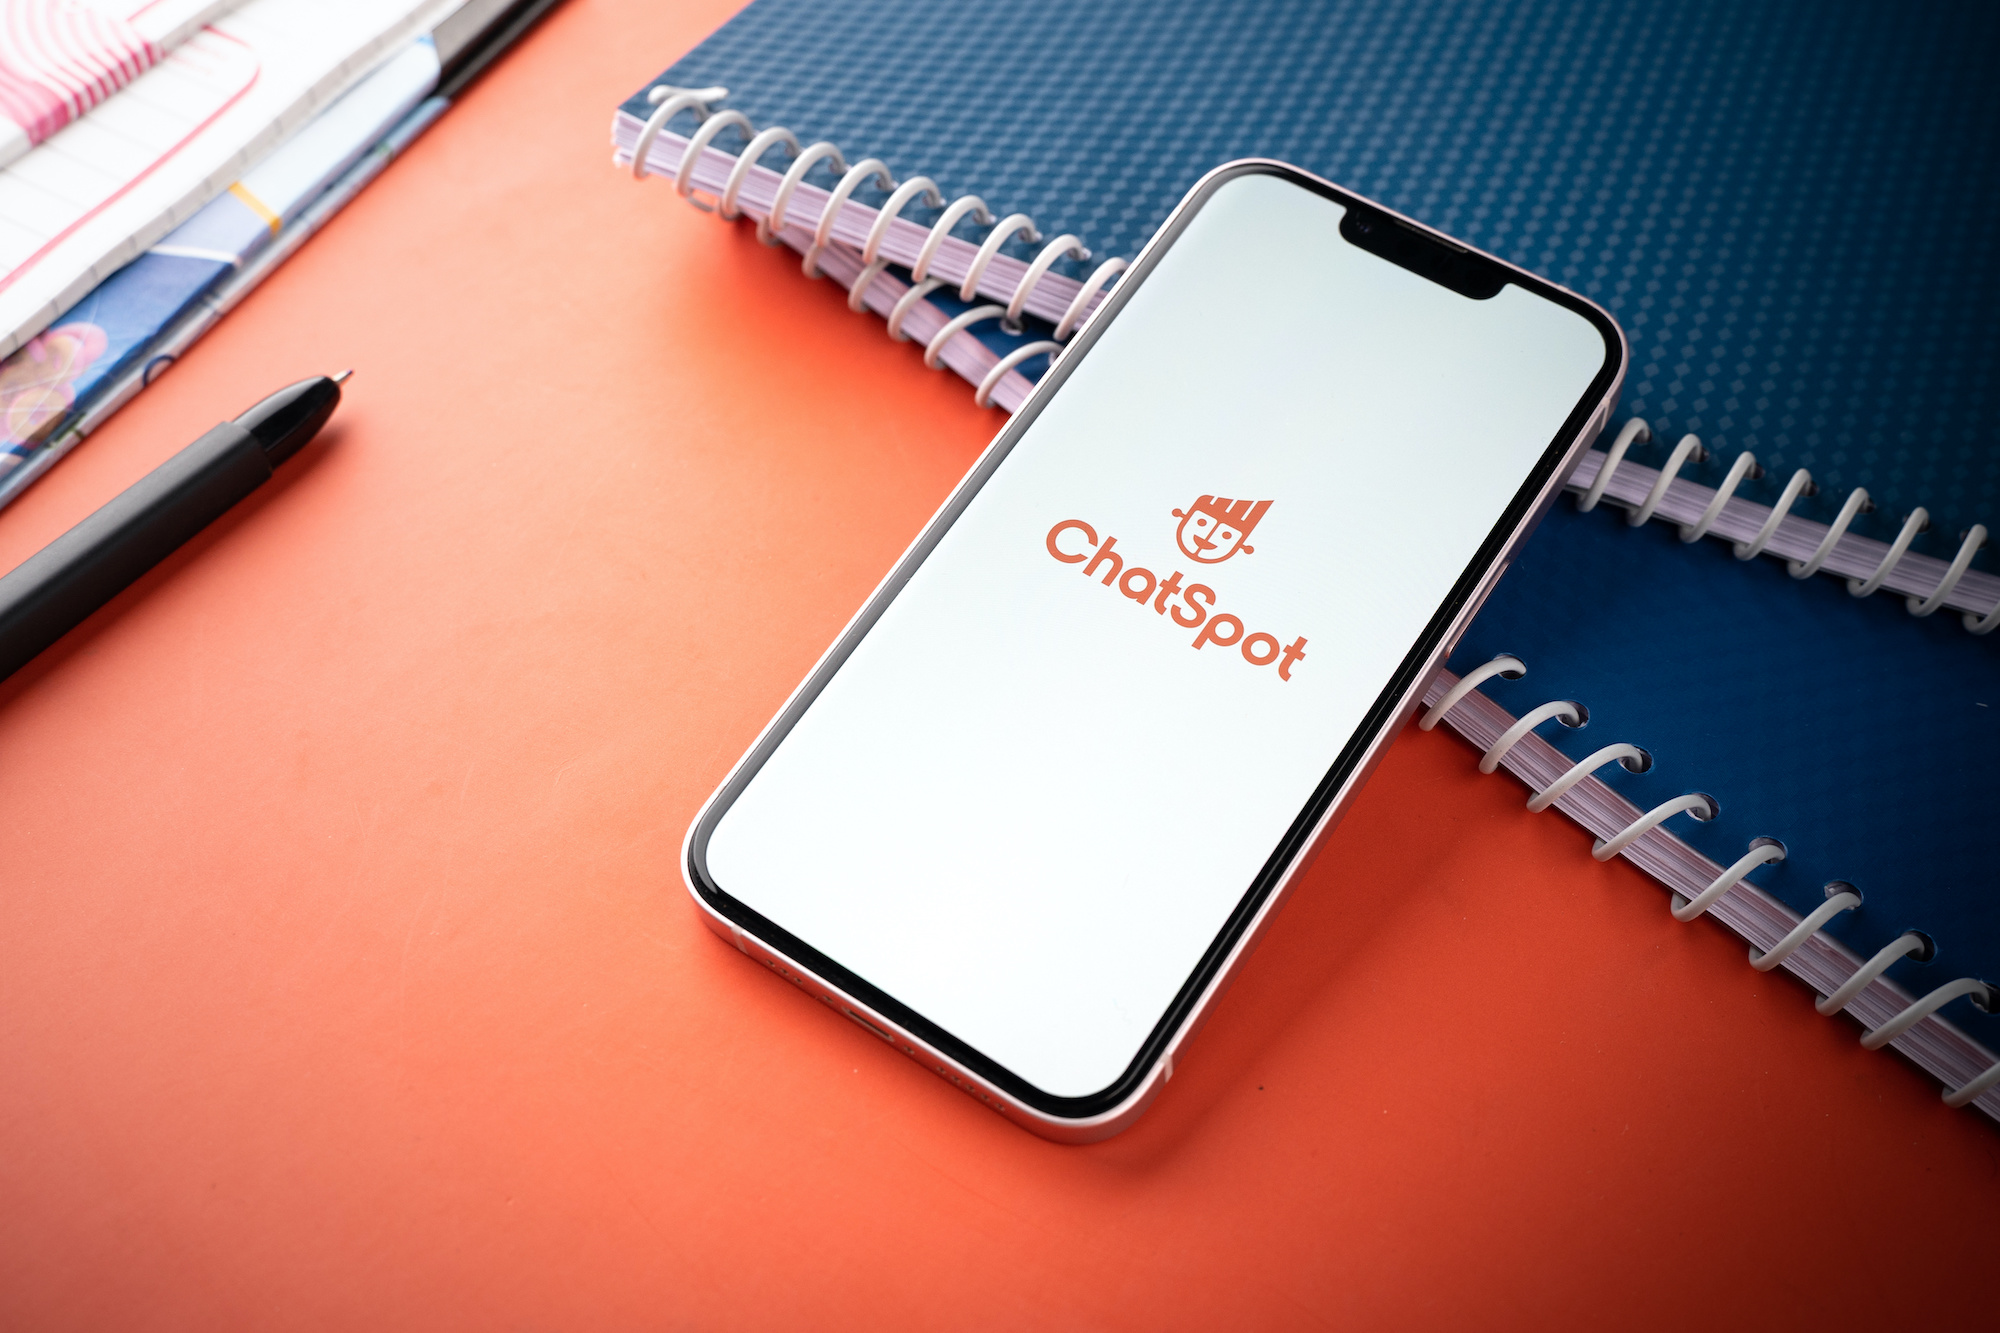 ChatSpot logo featured on a mobile device, surrounded by black notebooks and pens on an orange background